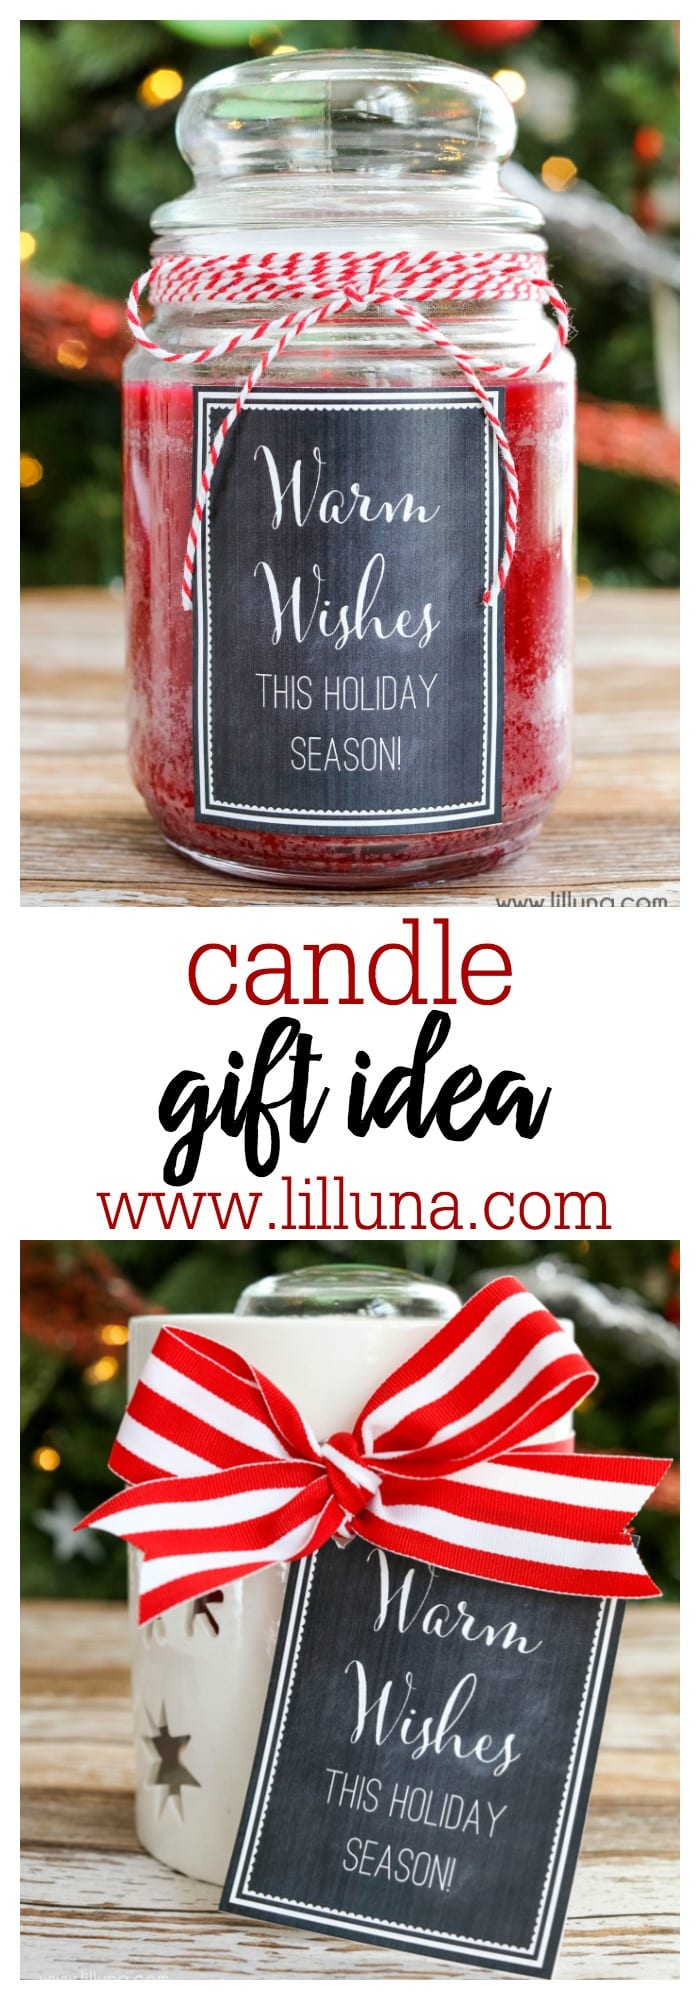 CUTE candle gift idea with free tags. Simple and inexpensive too!!